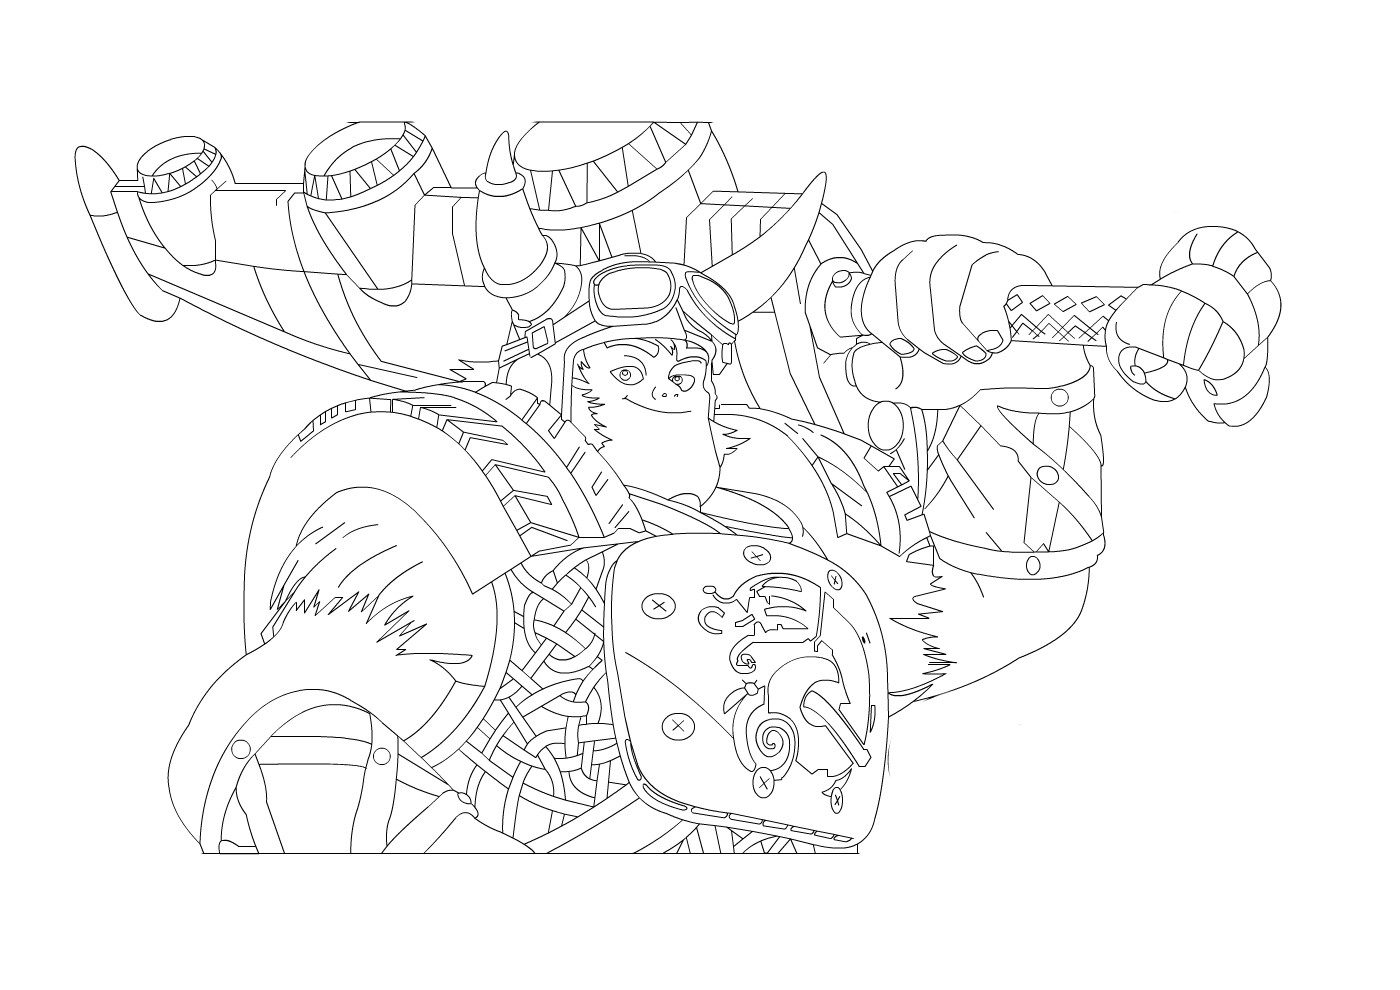 Zak Storm Coloring Pages To Download And Print For Free à Zak Storm Coloriage